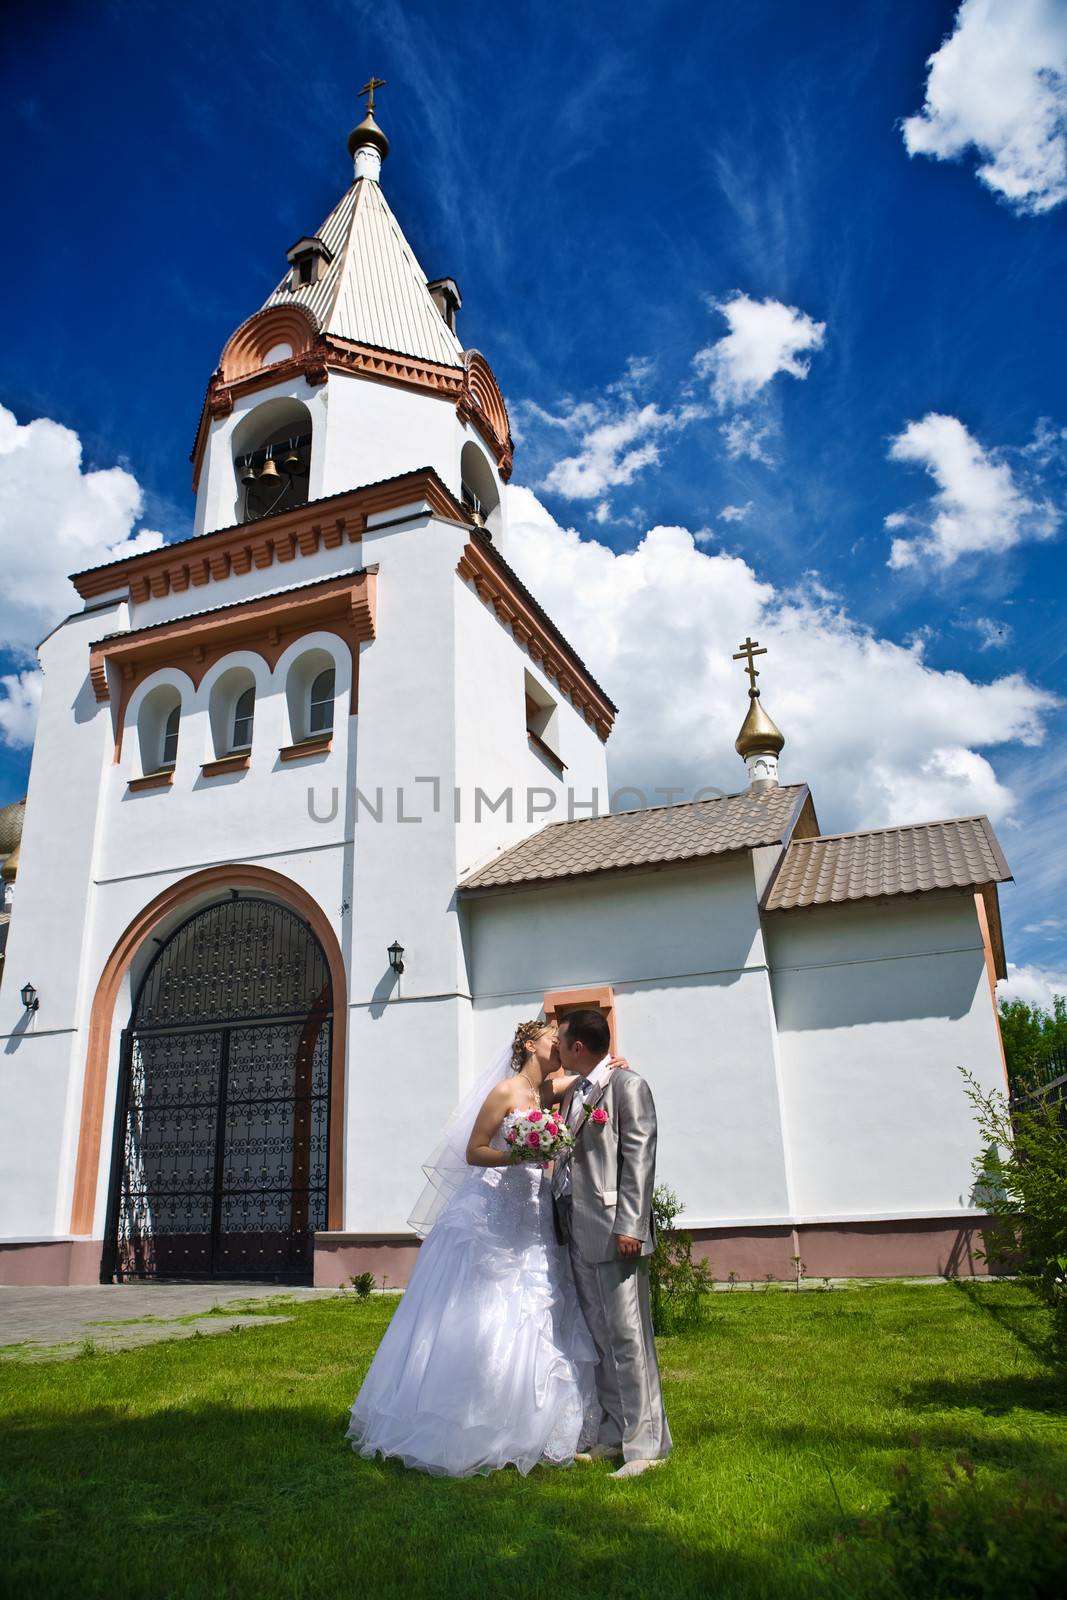 Newly married kiss on a background of church